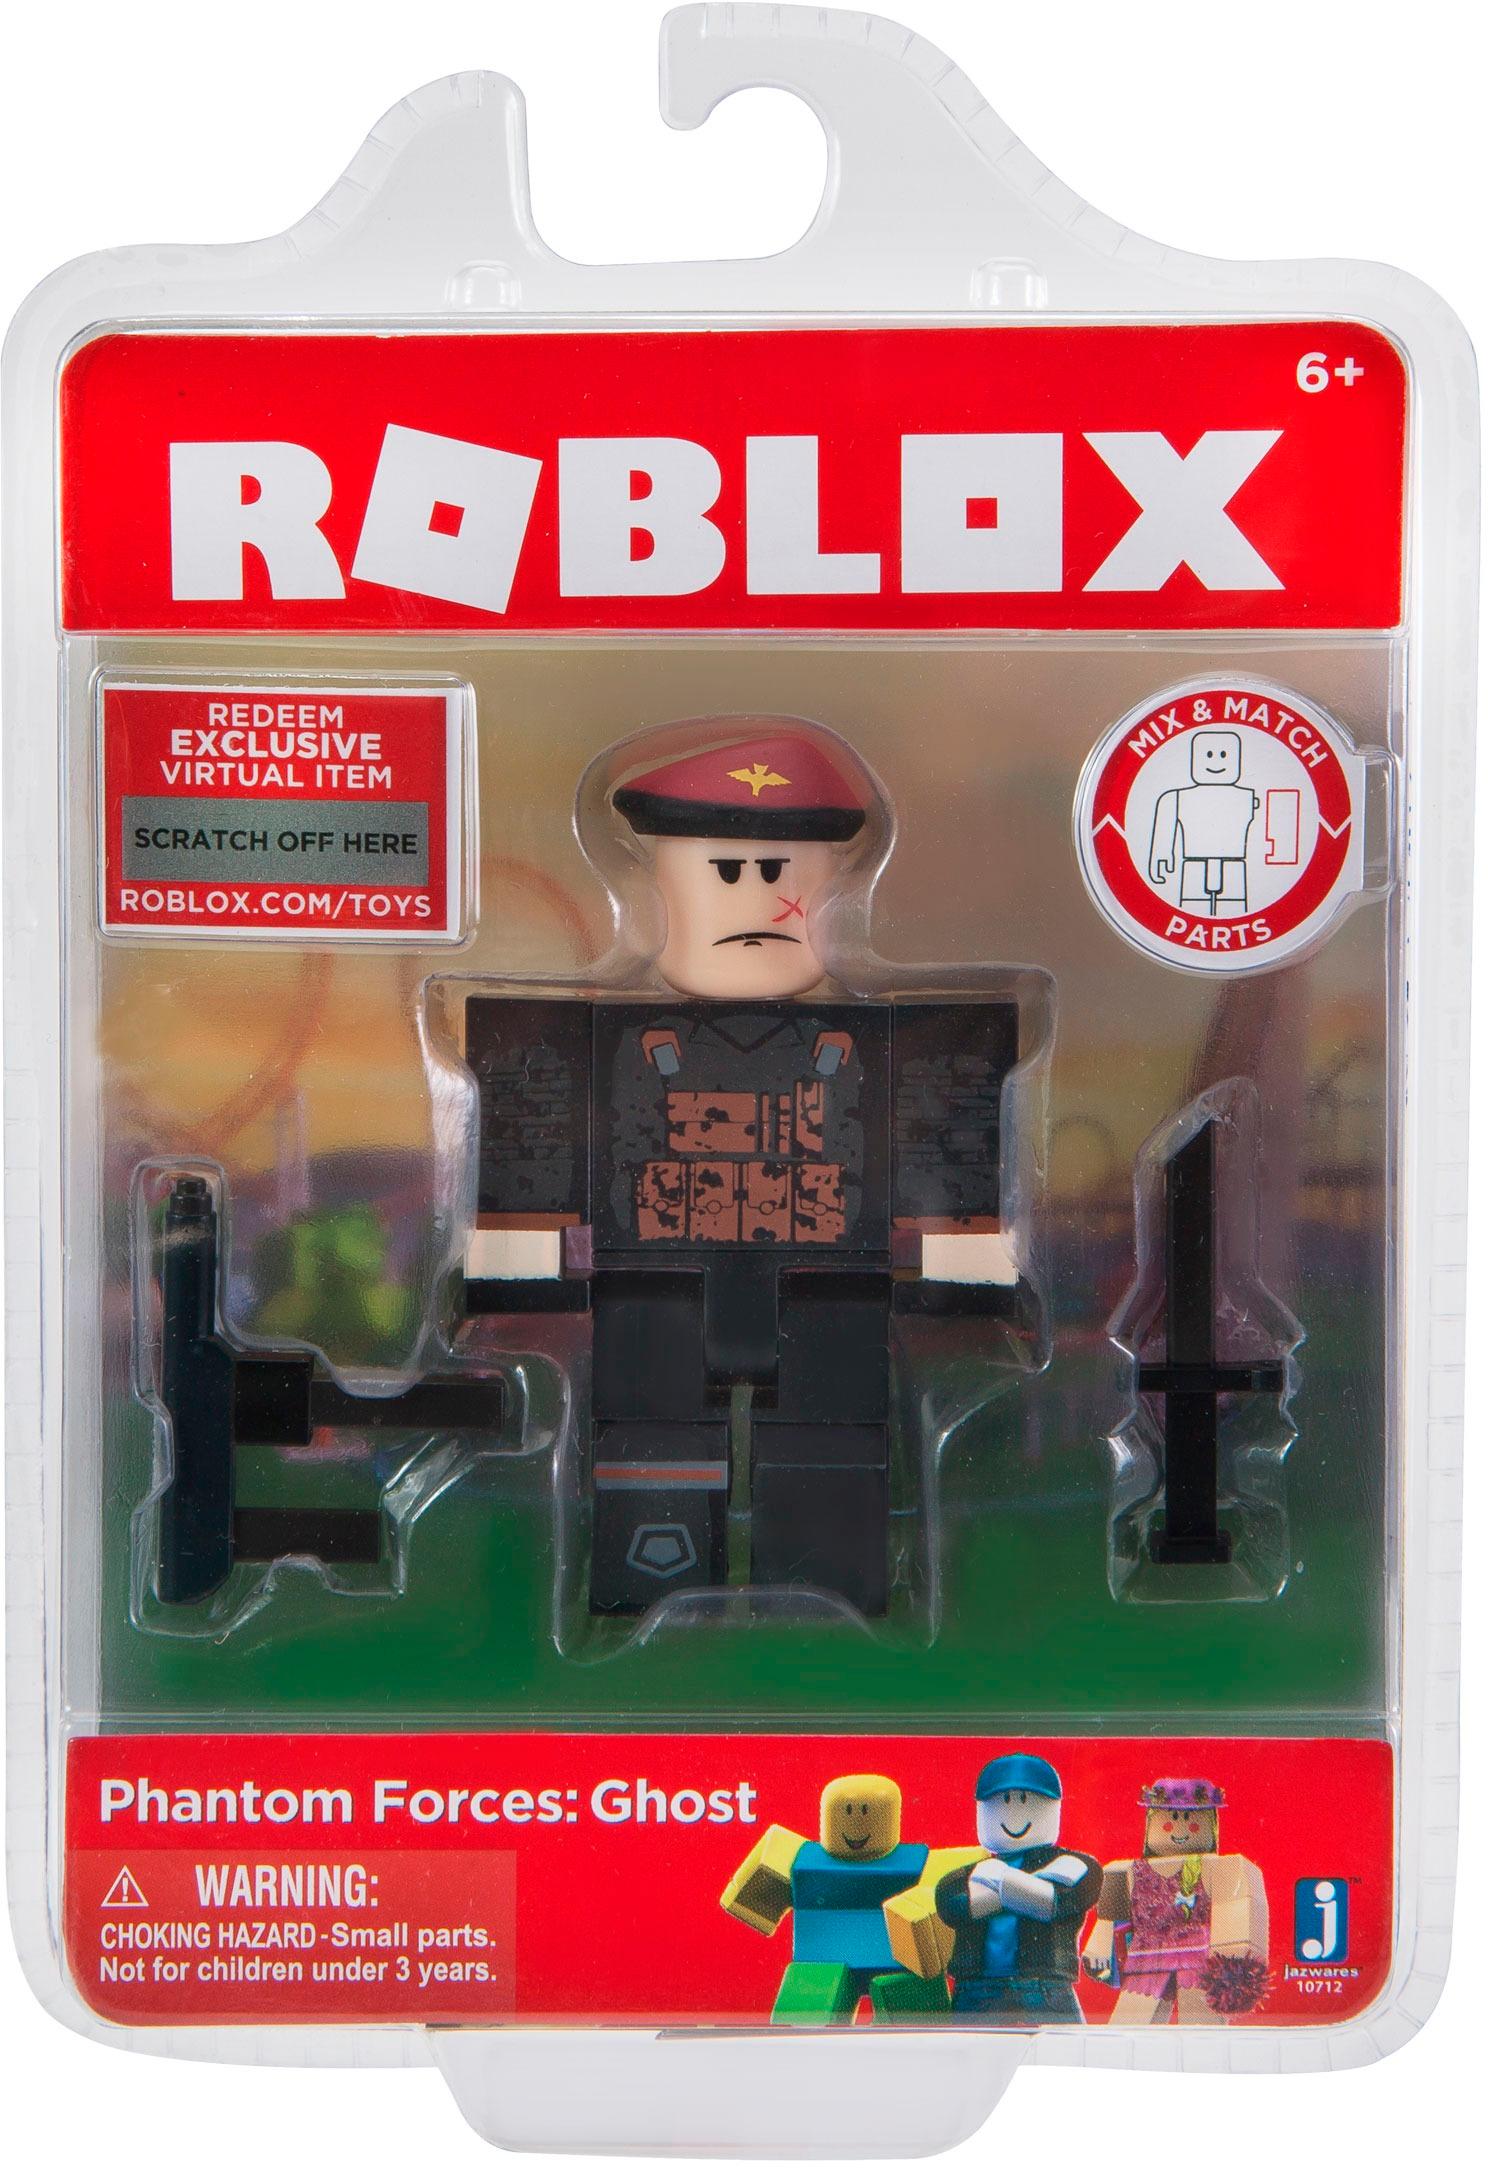 Best Buy Roblox Core Figure Styles May Vary 10705 - 